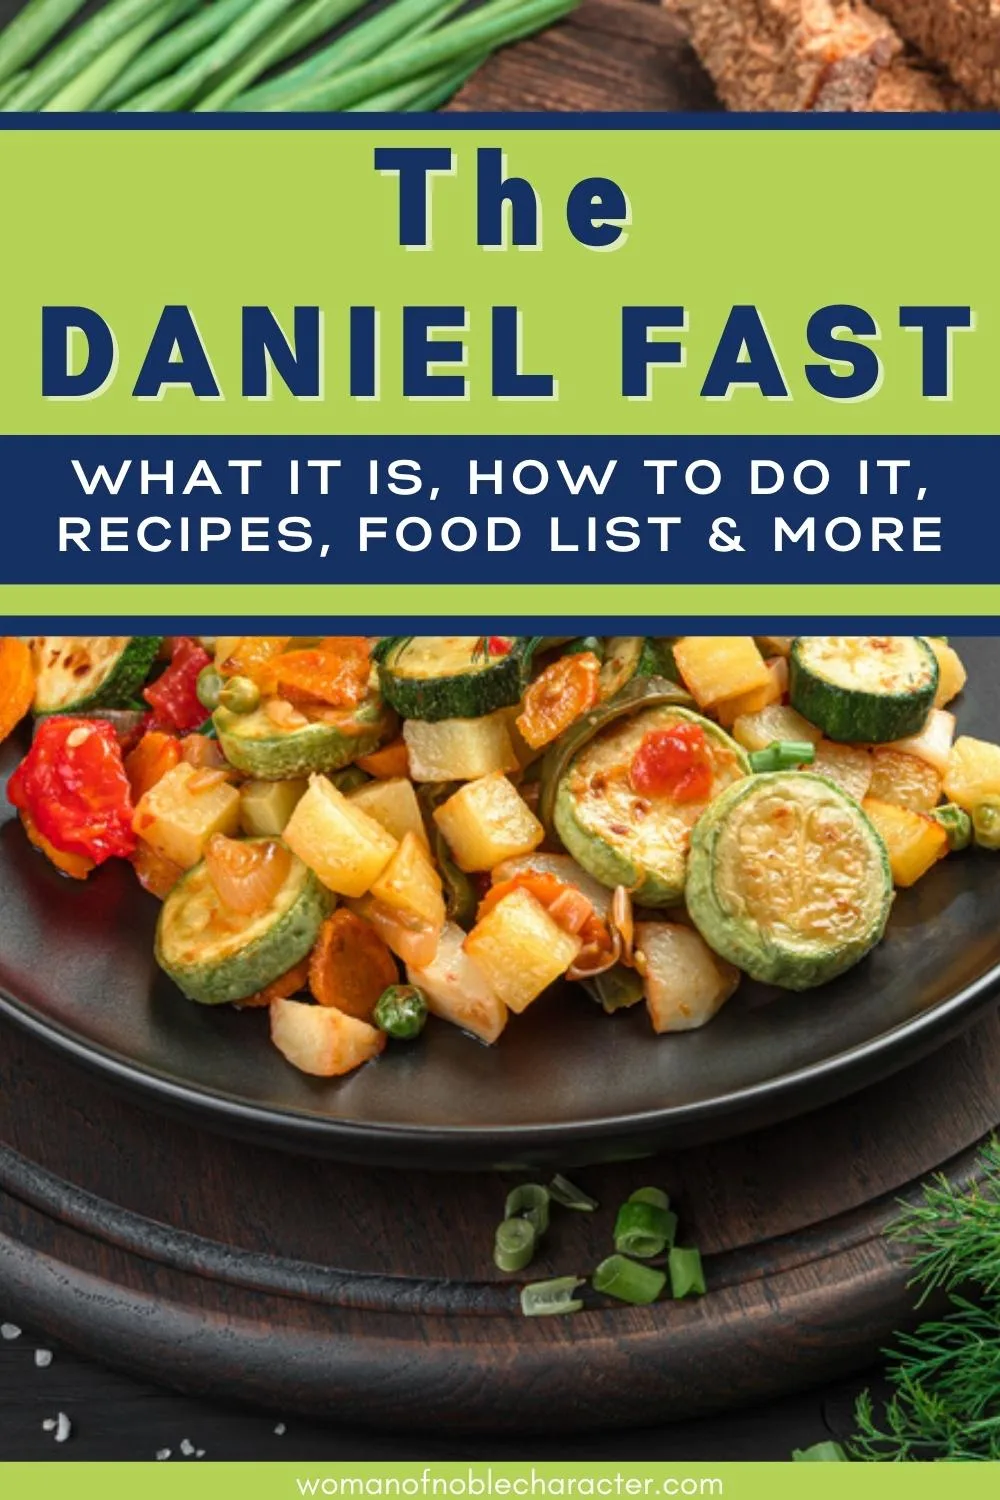 image of vegetables on a plate with the text The Daniel Fast: What it is, how to do it, recipes, food list and more